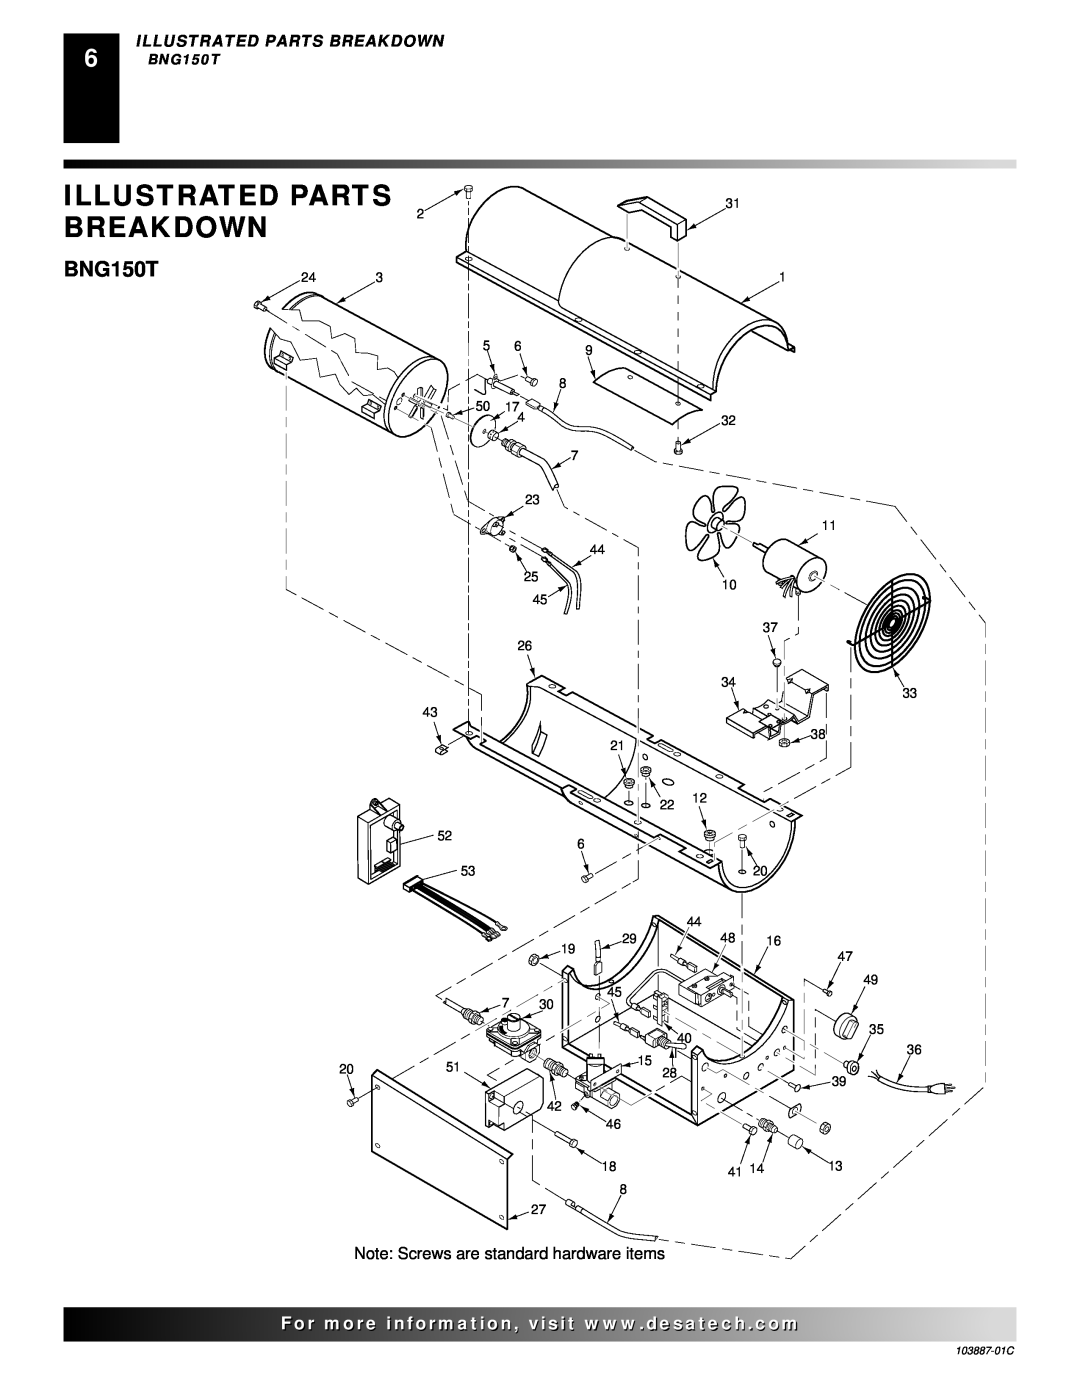 Desa BNG150T owner manual Illustrated Parts Breakdown 